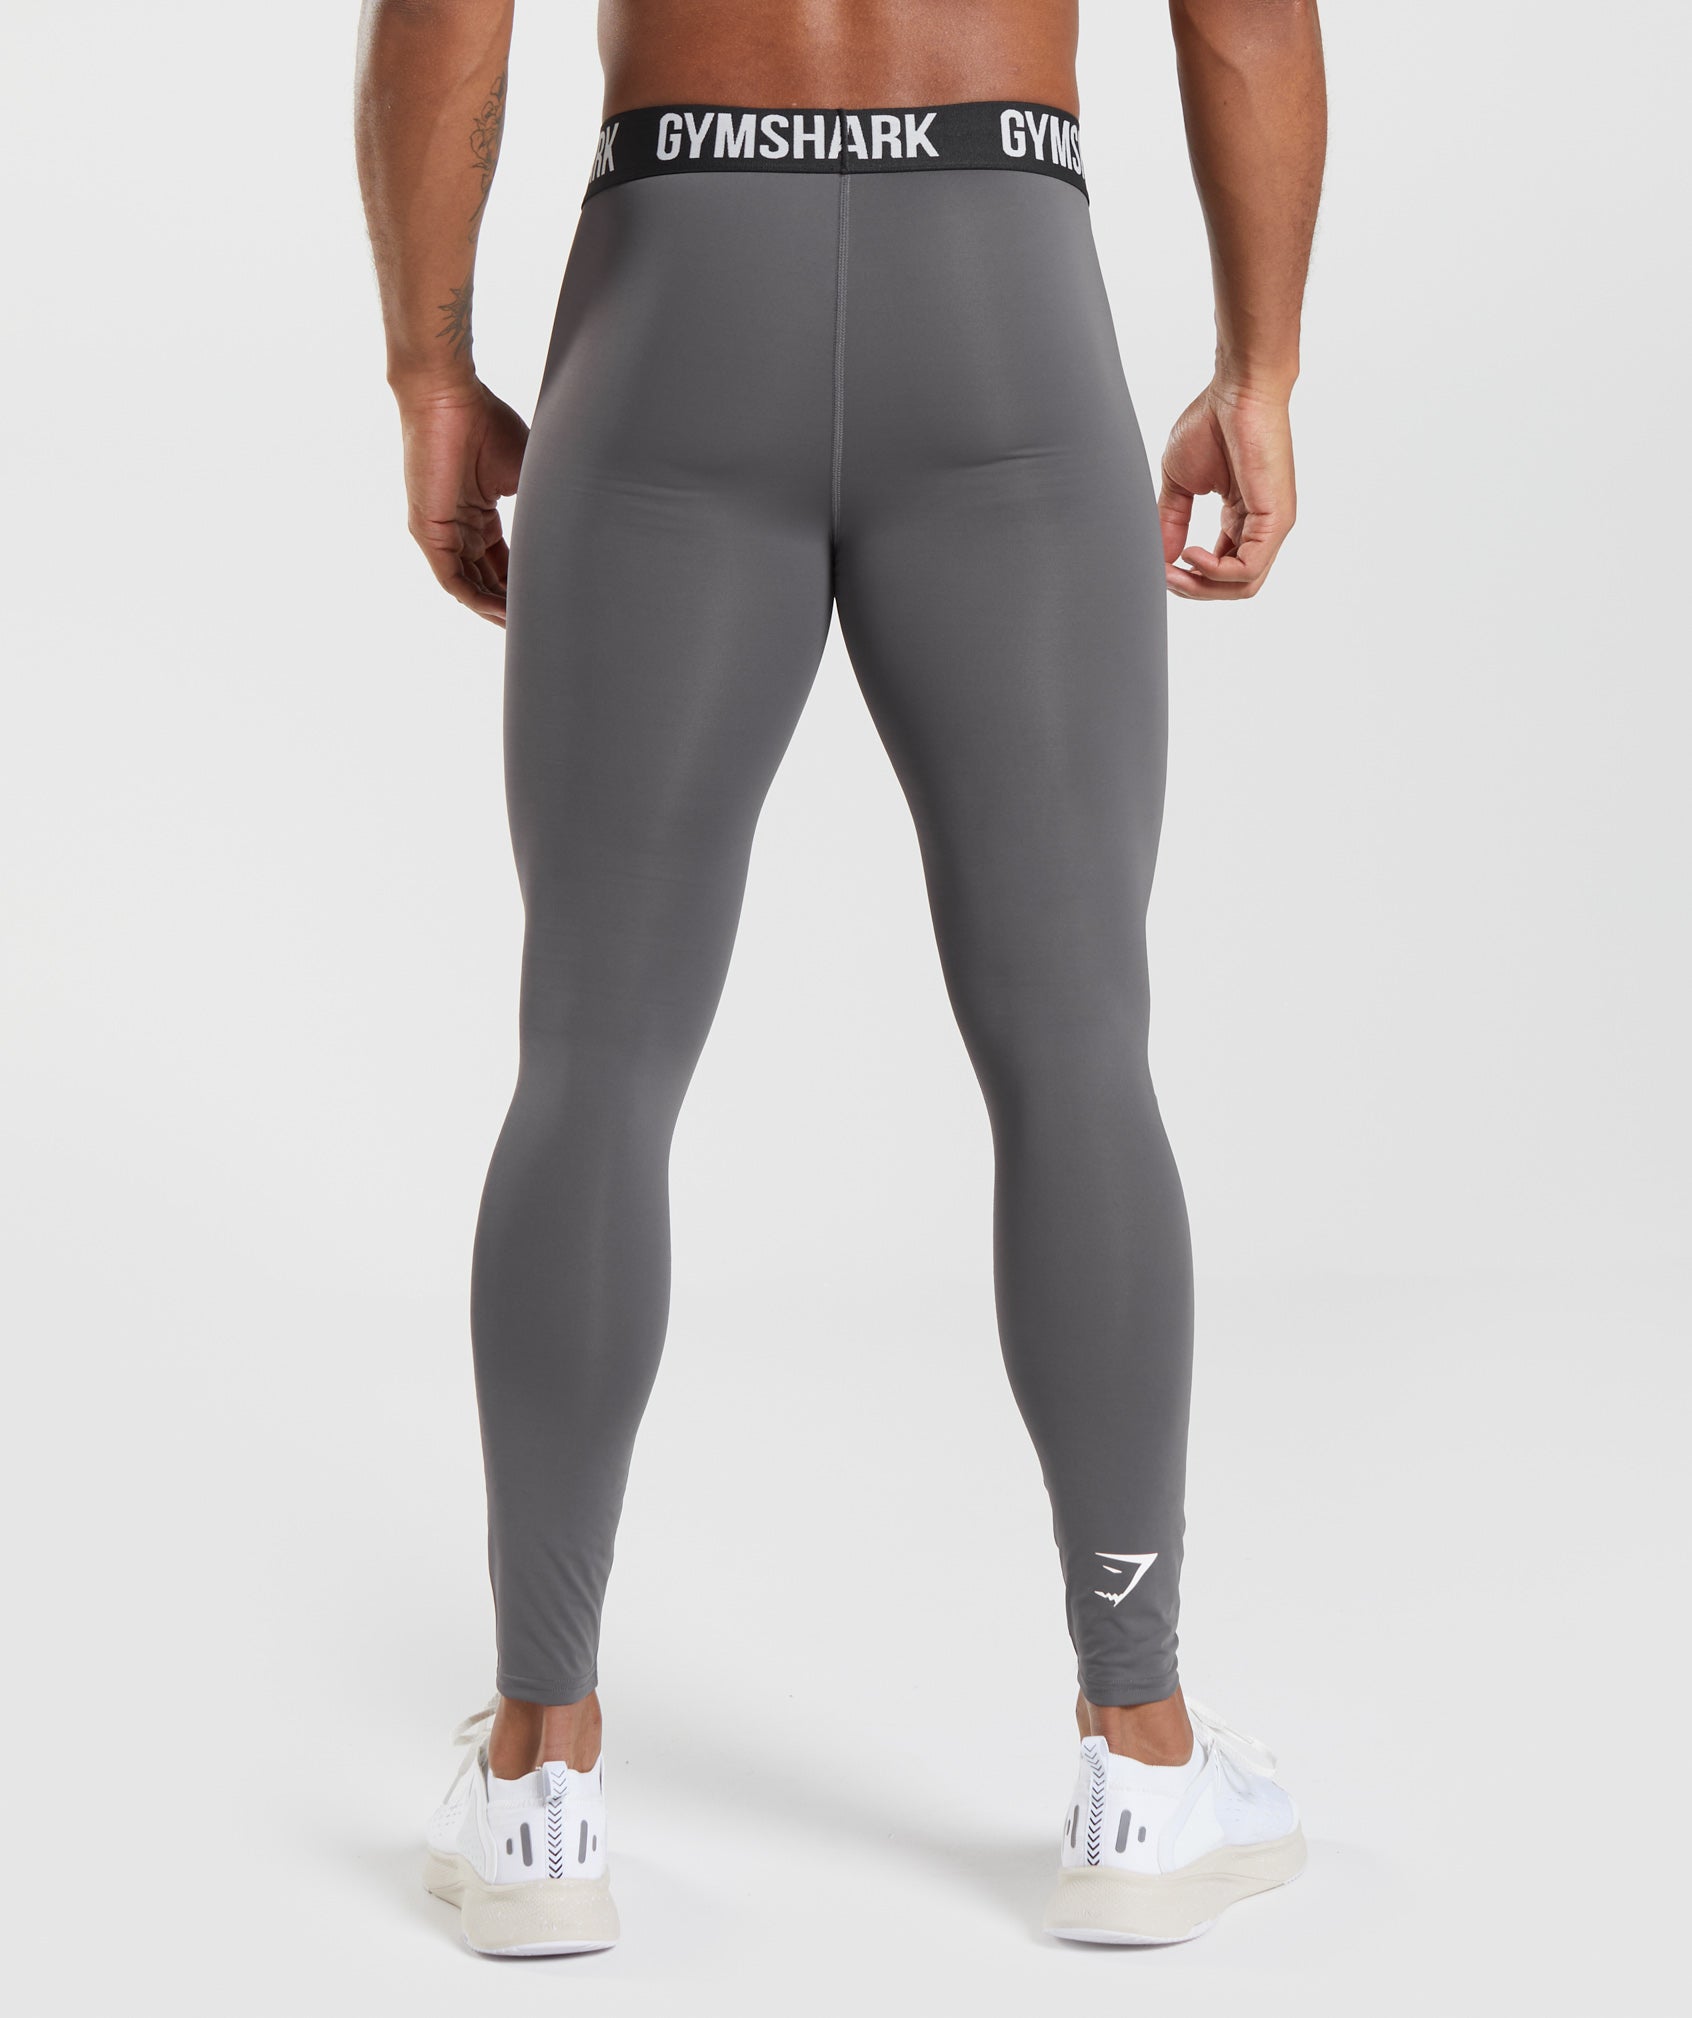 Under Armour Performance Clothing - Gym - Tights - Winter Edit